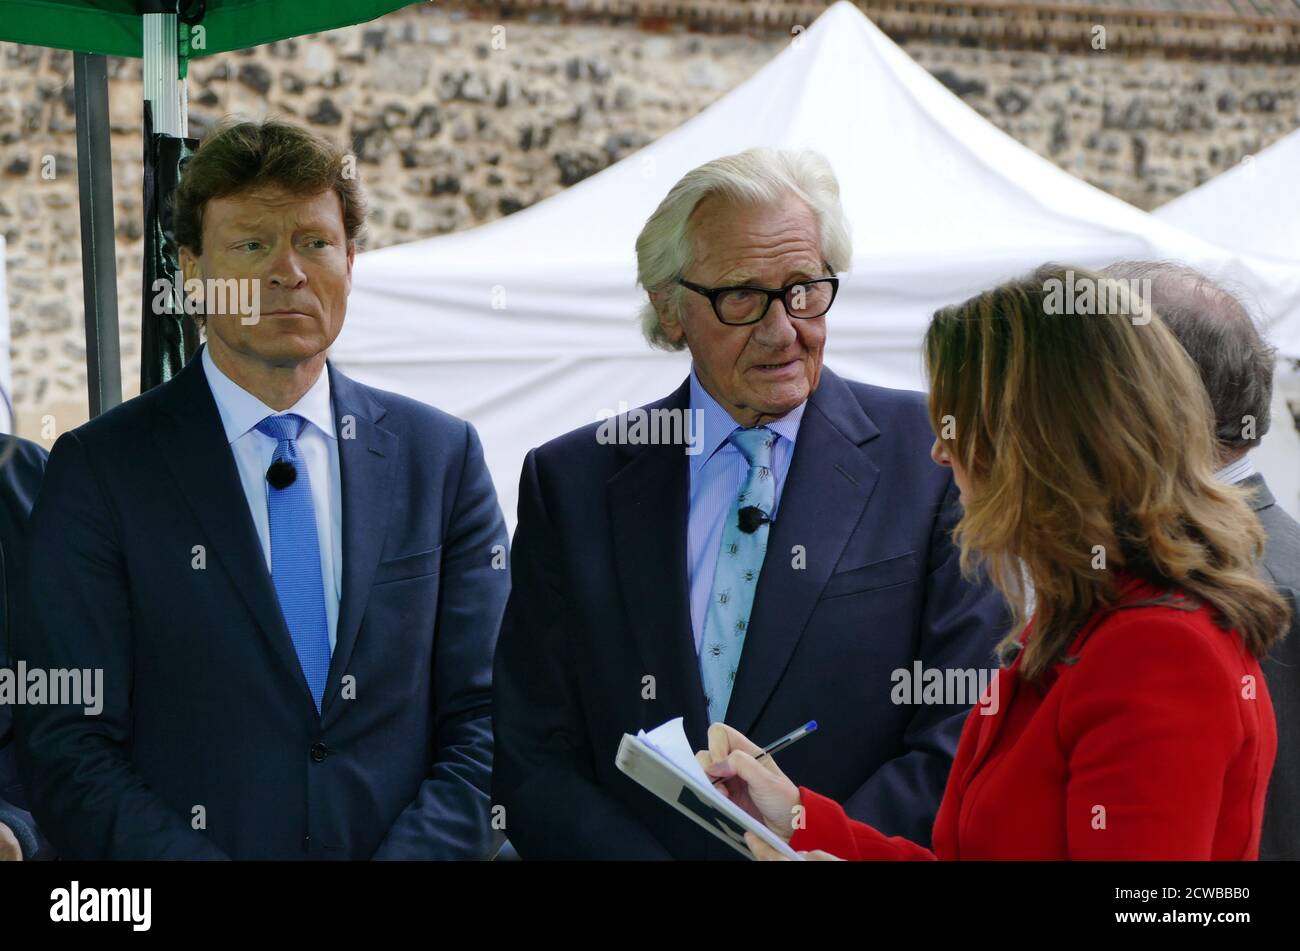 Interview with Lord Heseltine (2nd from Right) and Richard Tice (3rd from right). Michael Heseltine, Lord Heseltine, (born 1933), British politician and businessman. Heseltine served as Deputy Prime Minister. Richard Tice (born 1964) is a British businessman, and politician. founder of the pro-Brexit campaign groups Leave Means Leave, and Leave.EU. Stock Photo